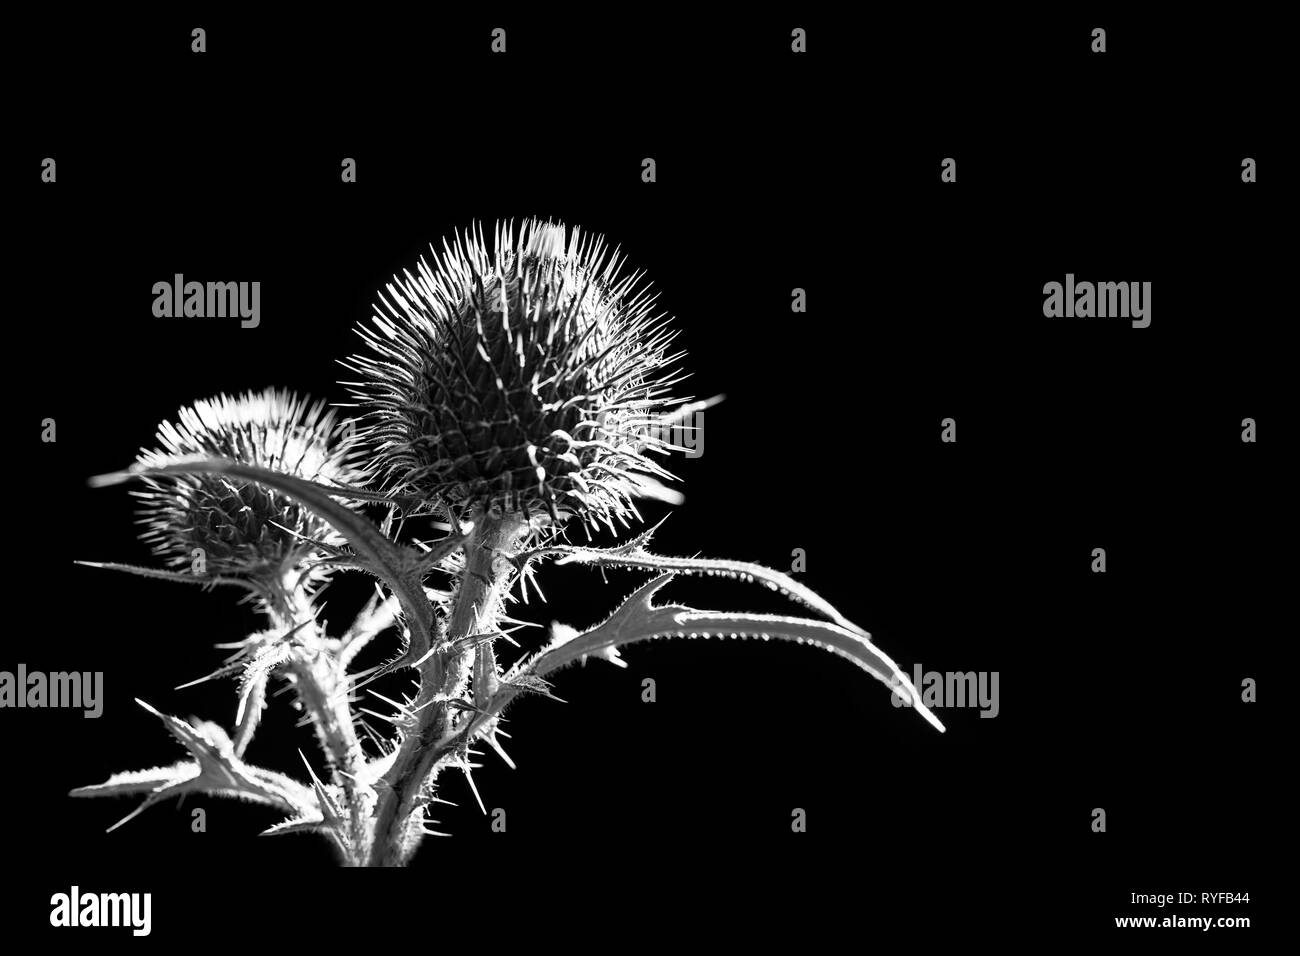 Flower buds of plumeless thistle on black background. Carduus. Artistic melancholy detail of spring plant silhouette. Spiny leaves. Fragile beauty. Stock Photo